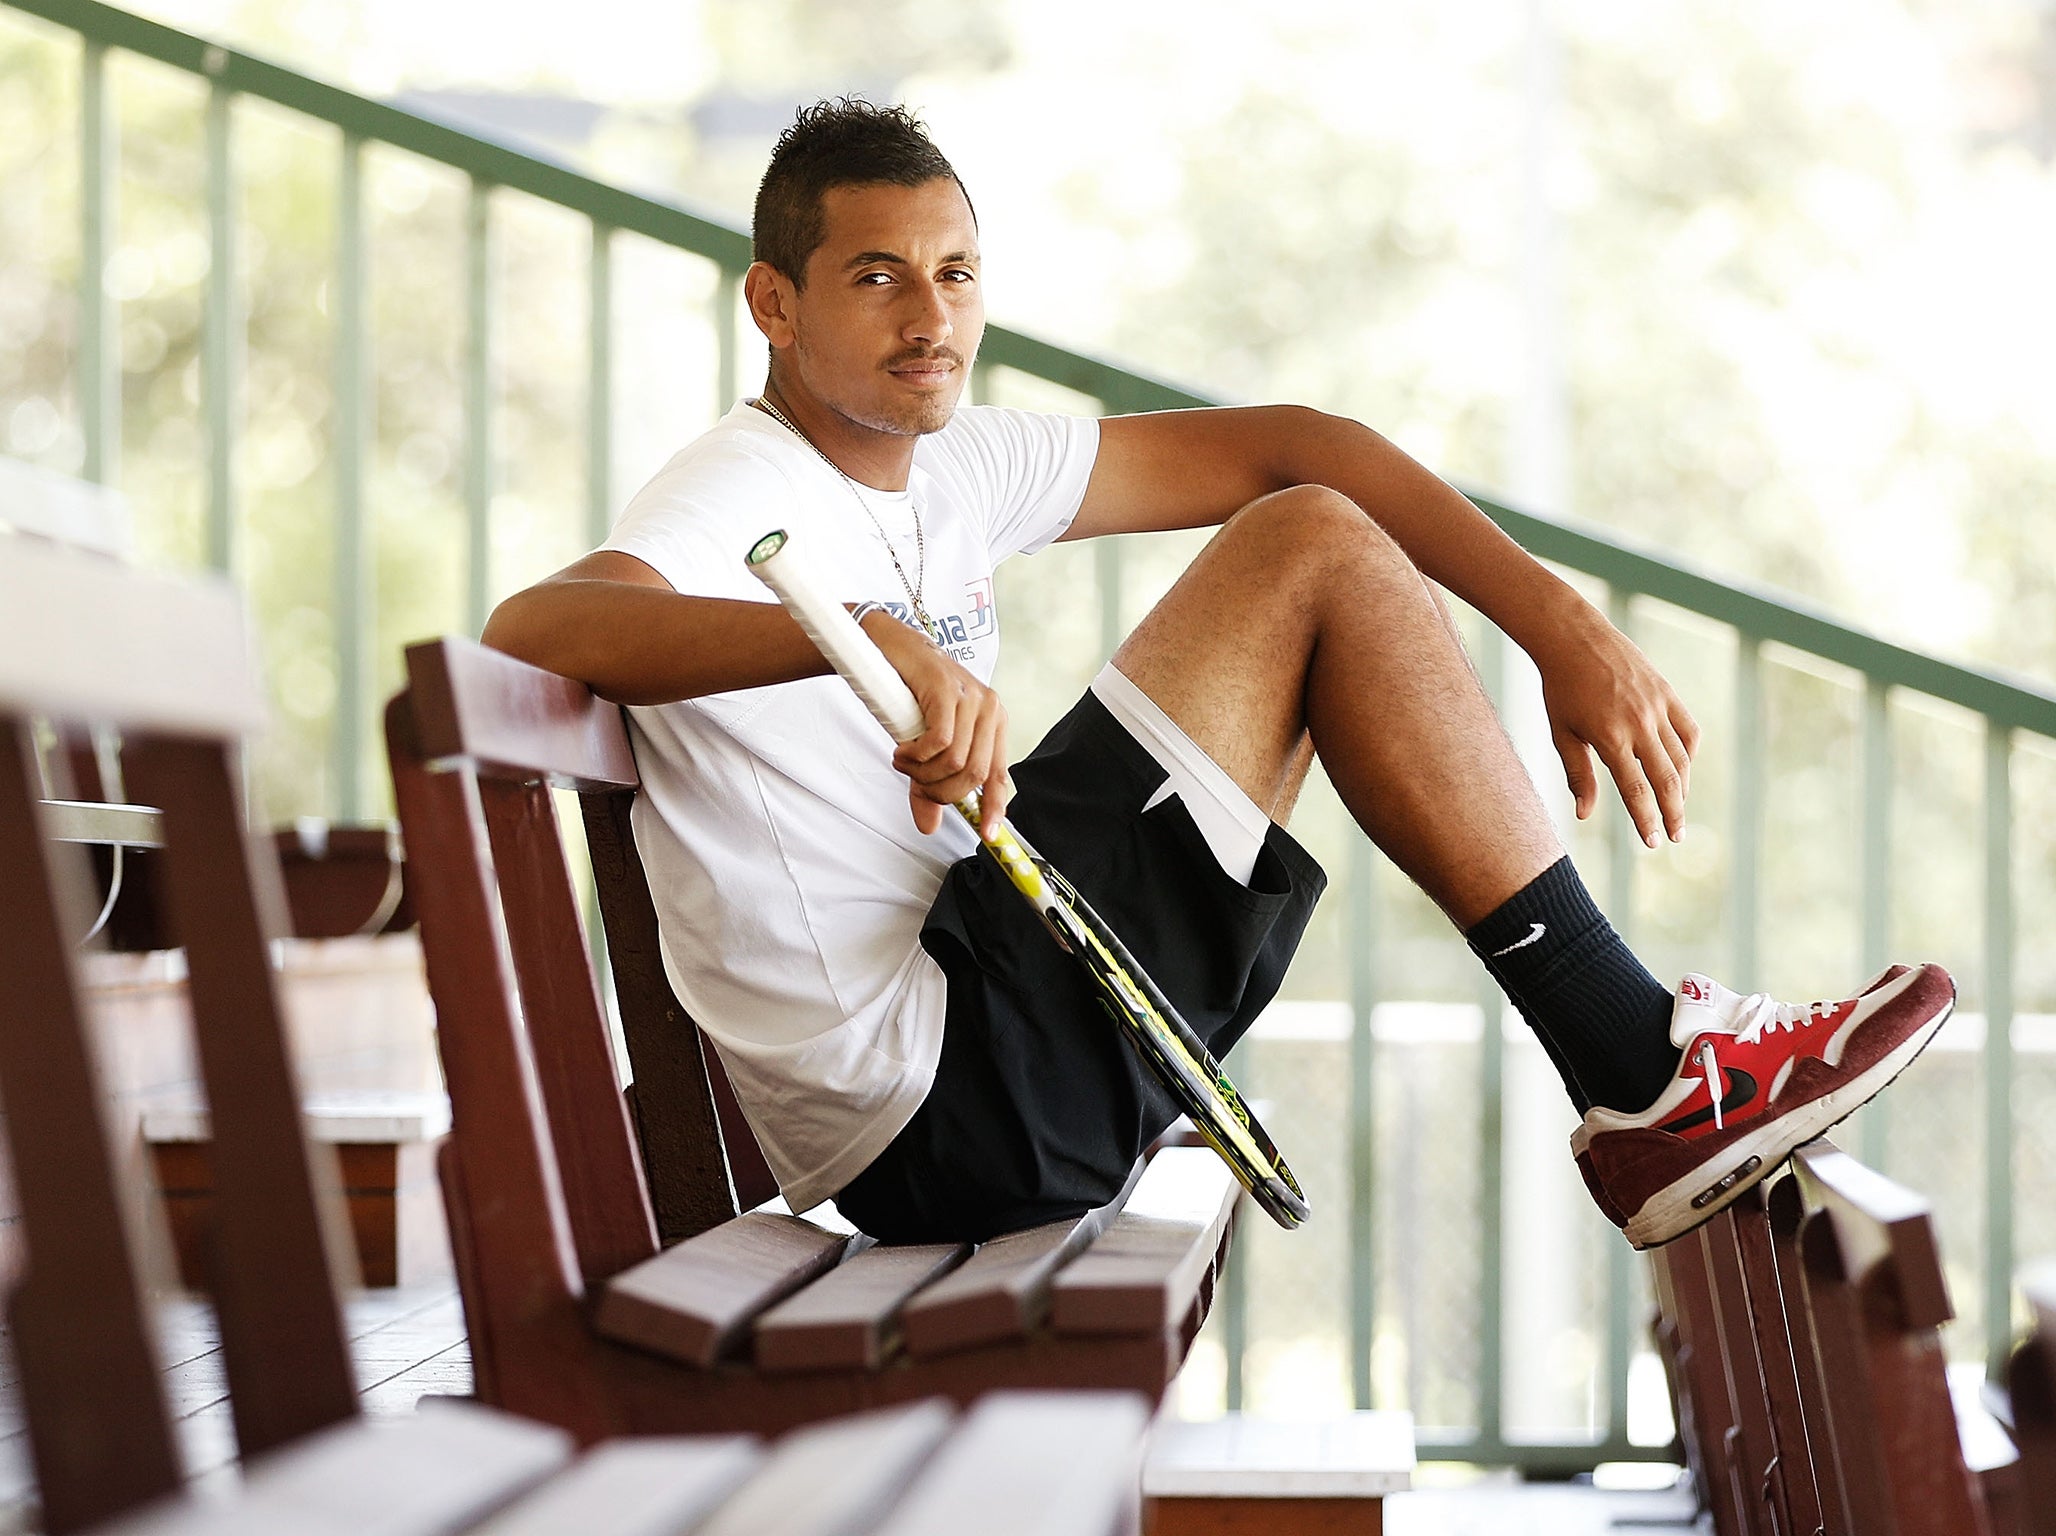 Nick Kyrgios thinks his best is still ahead of him